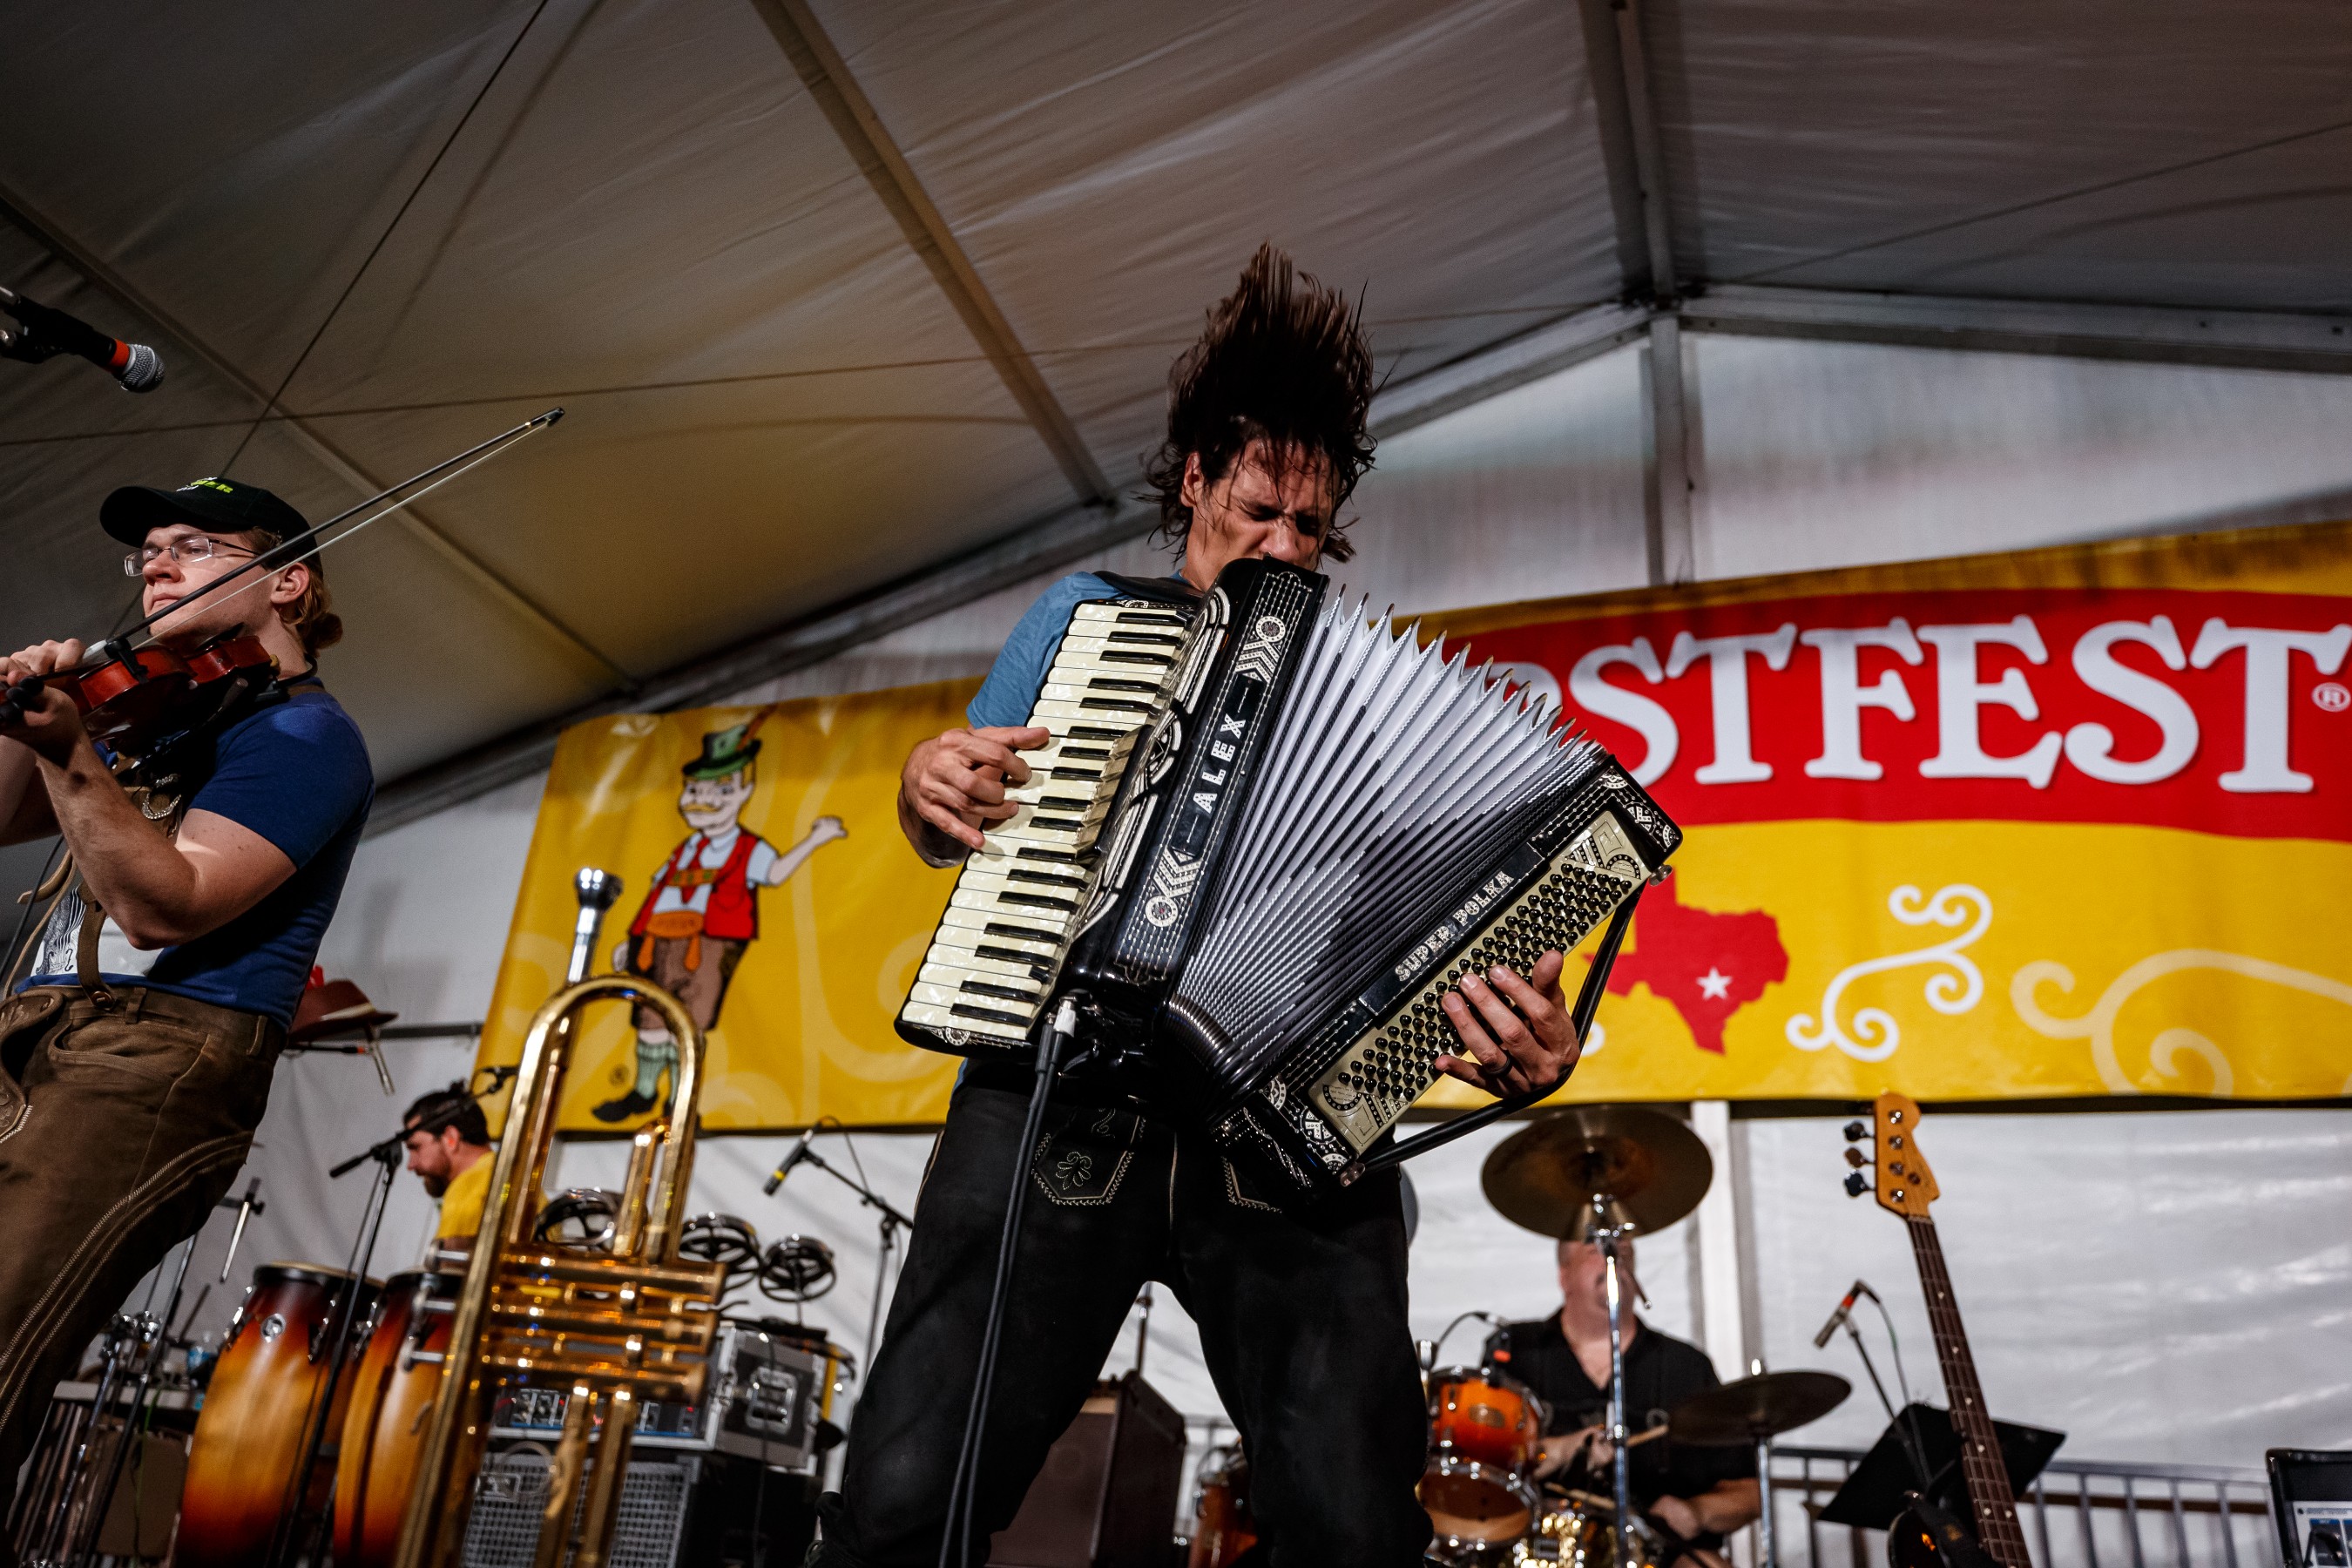 Grammy-nominated accordionist Alex Meixner performs in the Das Grosse Zelt (The Big Tent). The best in Alpine and Bavarian entertainment span the 10-day festival featuring Grammy-award winning polka musician Jimmy Sturr and his Orchestra, Meixner and Mollie B with Squeezebox and Ted Lange, who were recognized as International Band of the Year from the International Polka Association in 2019.